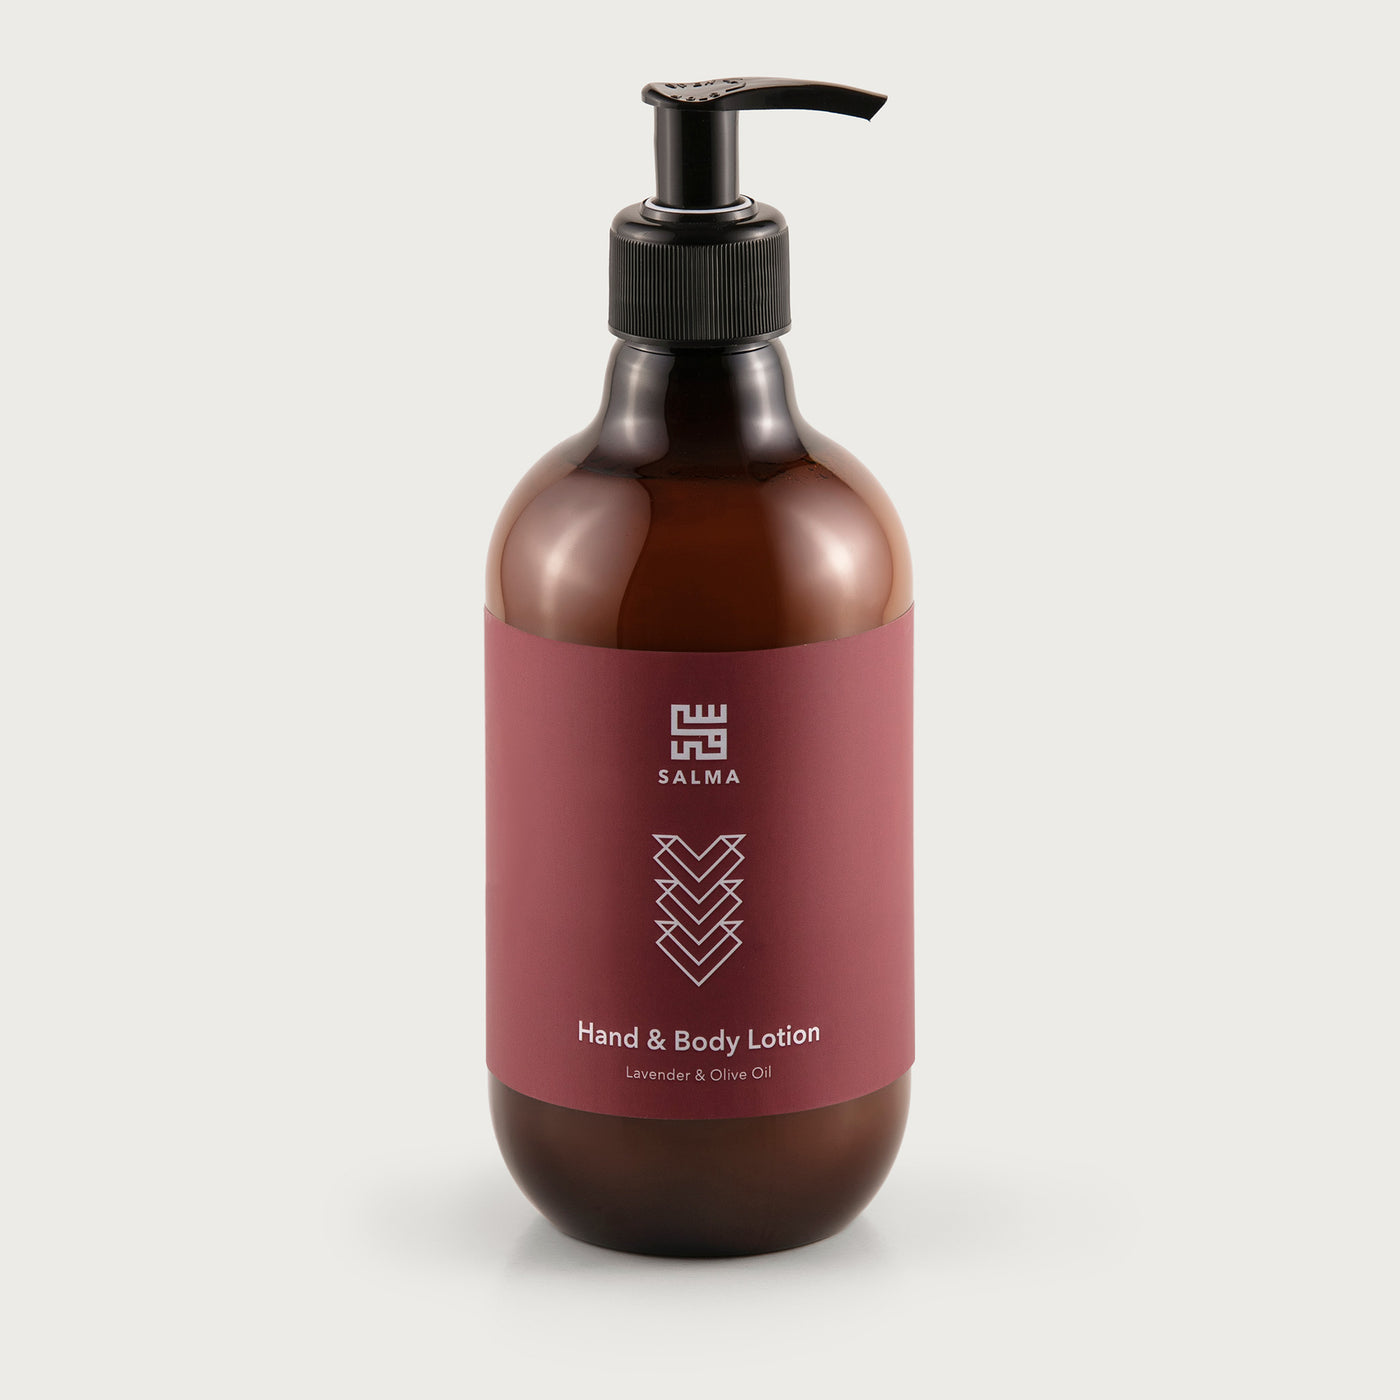 Shop The Latest Collection Of Salma Loves Beauty Hand & Body Lotion Lavender & Olive Oil 500Ml - Slb53 In Lebanon